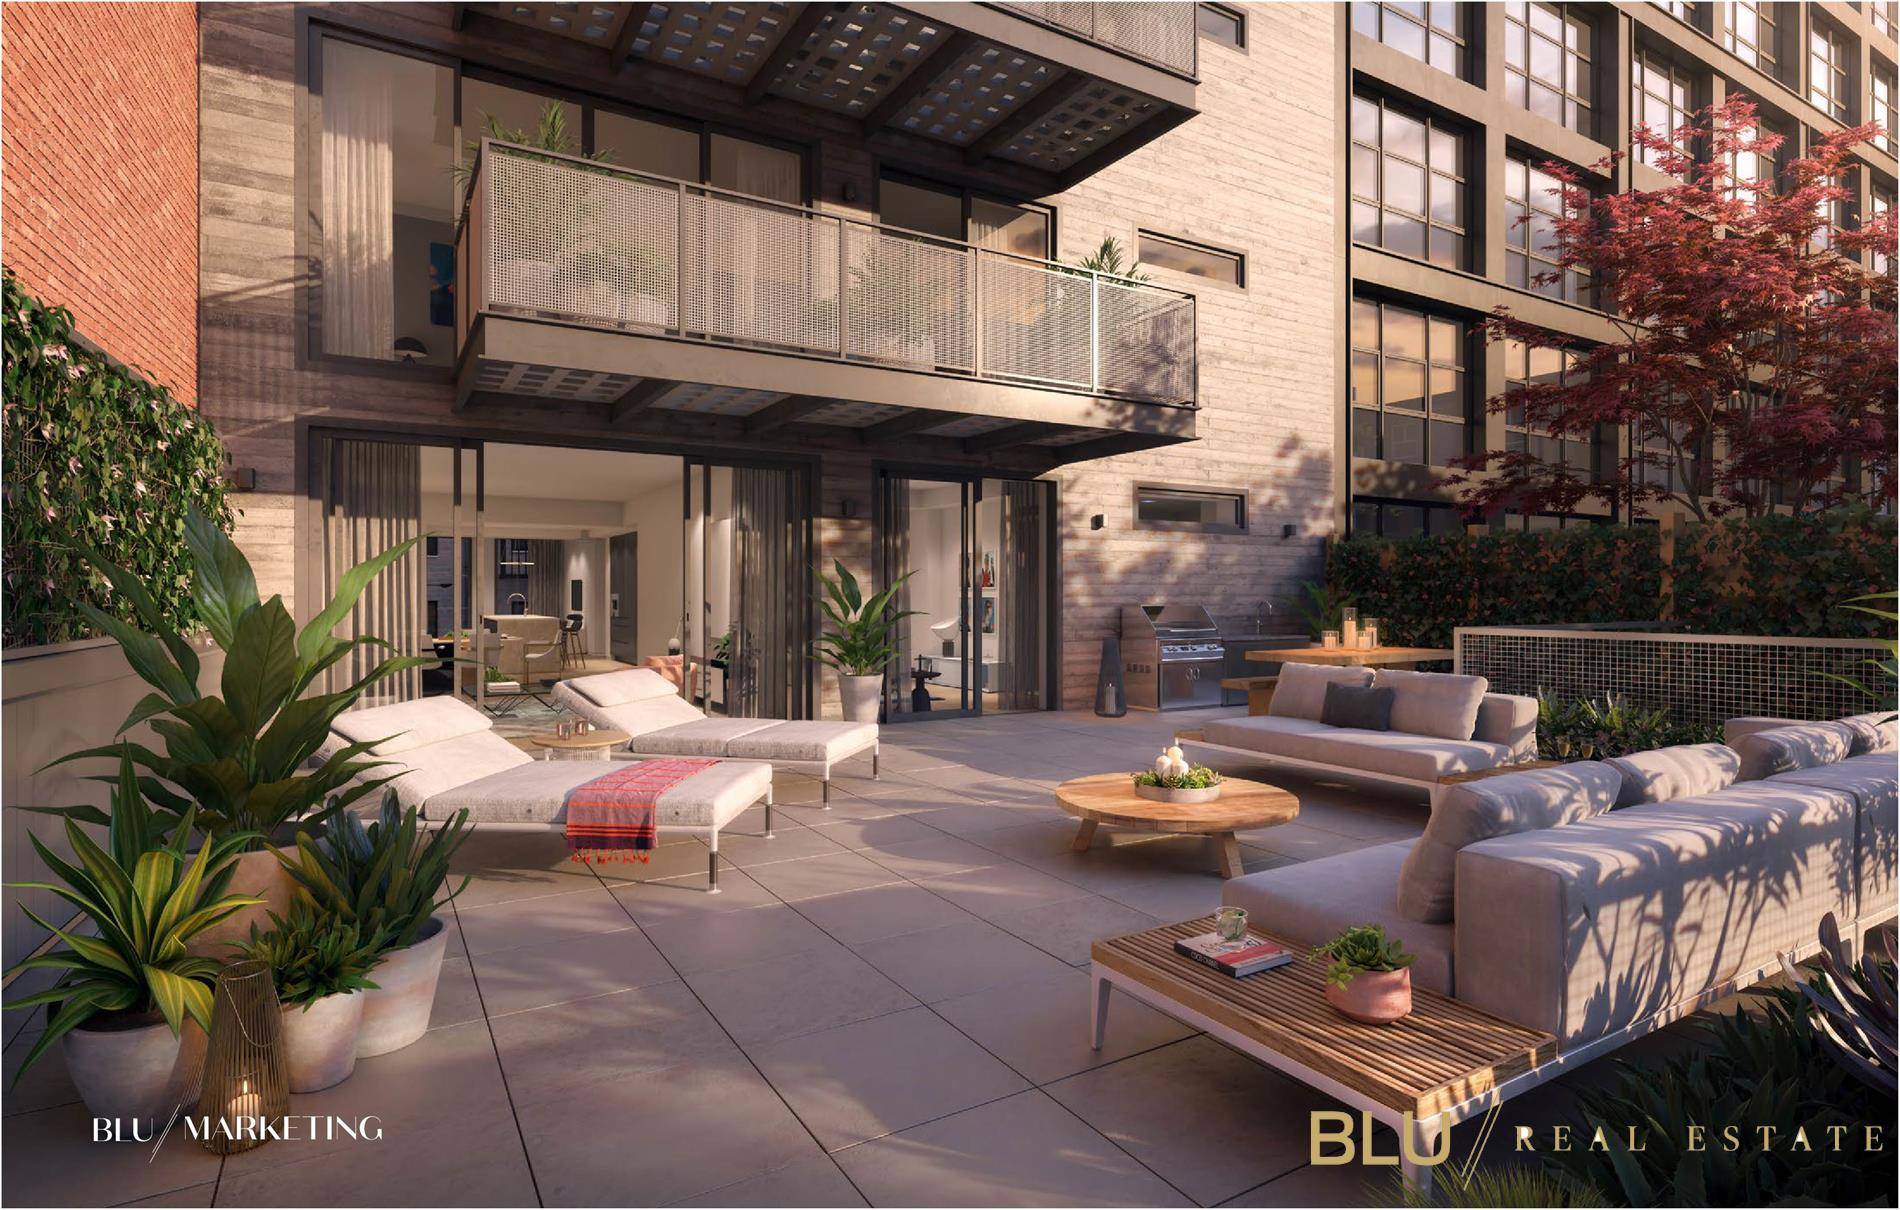 Developed by Nexus and designed by Morris Adjmi Architects, 260 Bowery is an art piece, limited to just 5 residences.